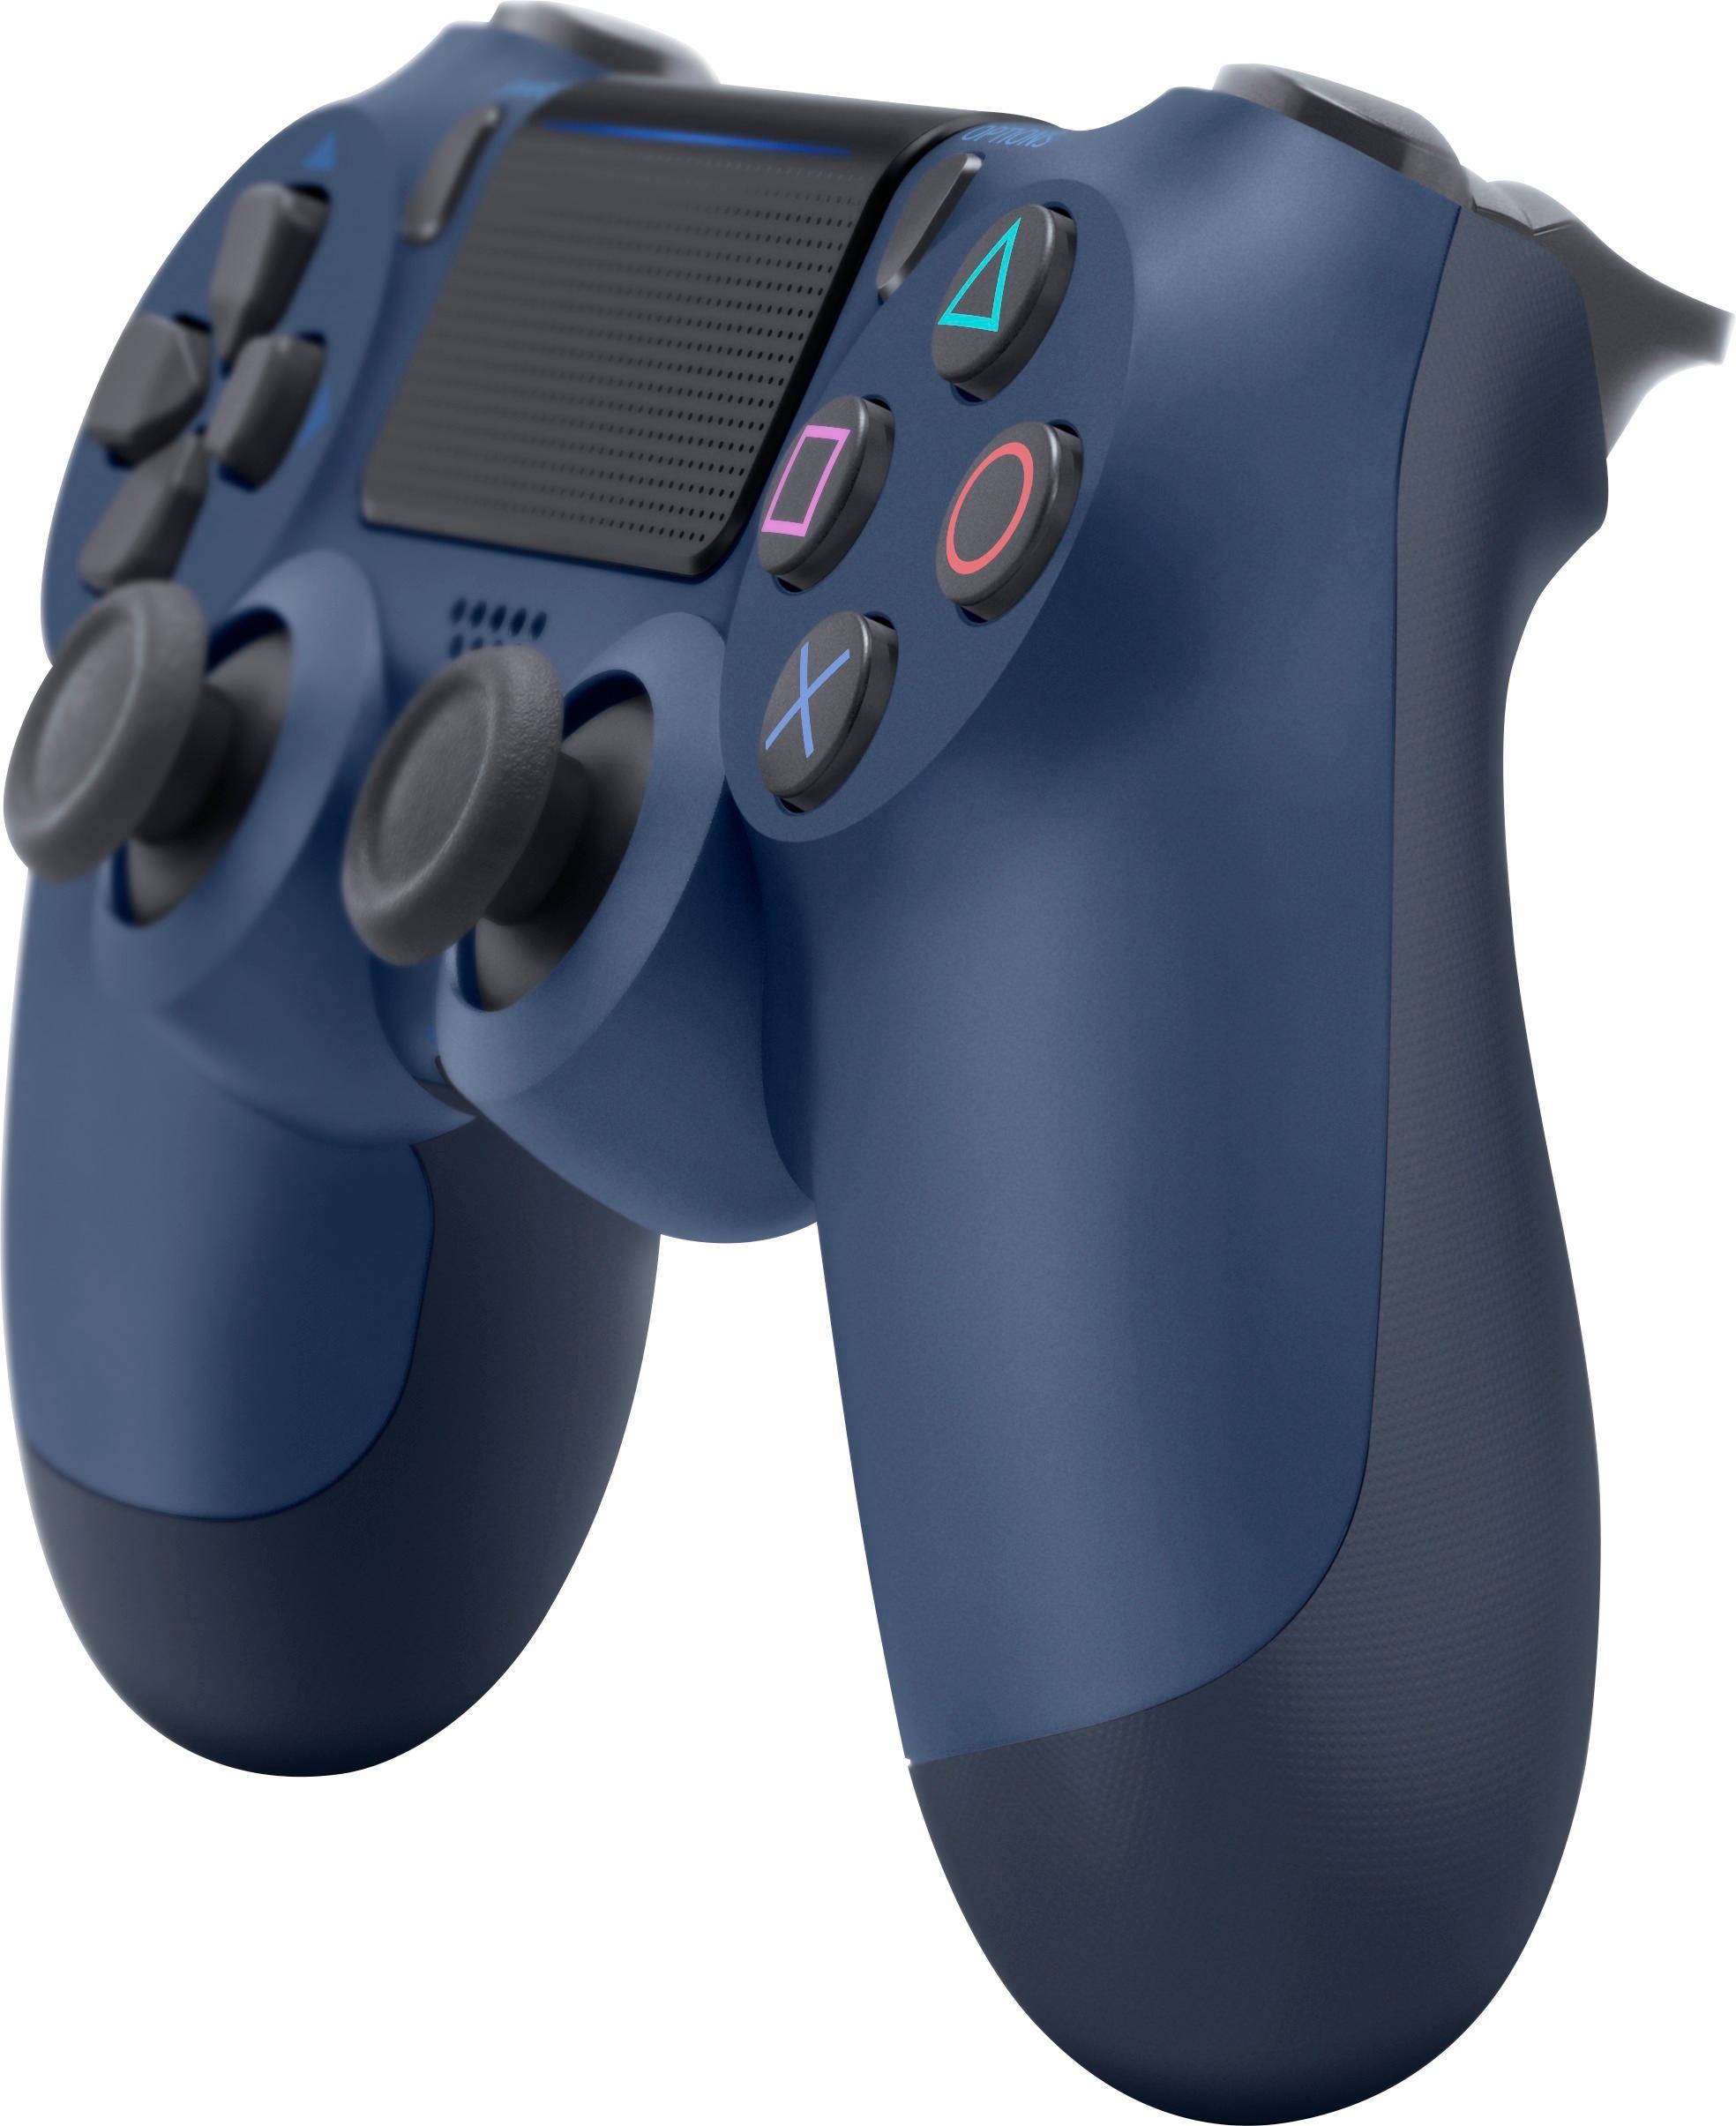 Sony PS4 DualShock 4 Wireless Controller - Midnight Blue - image 5 of 5